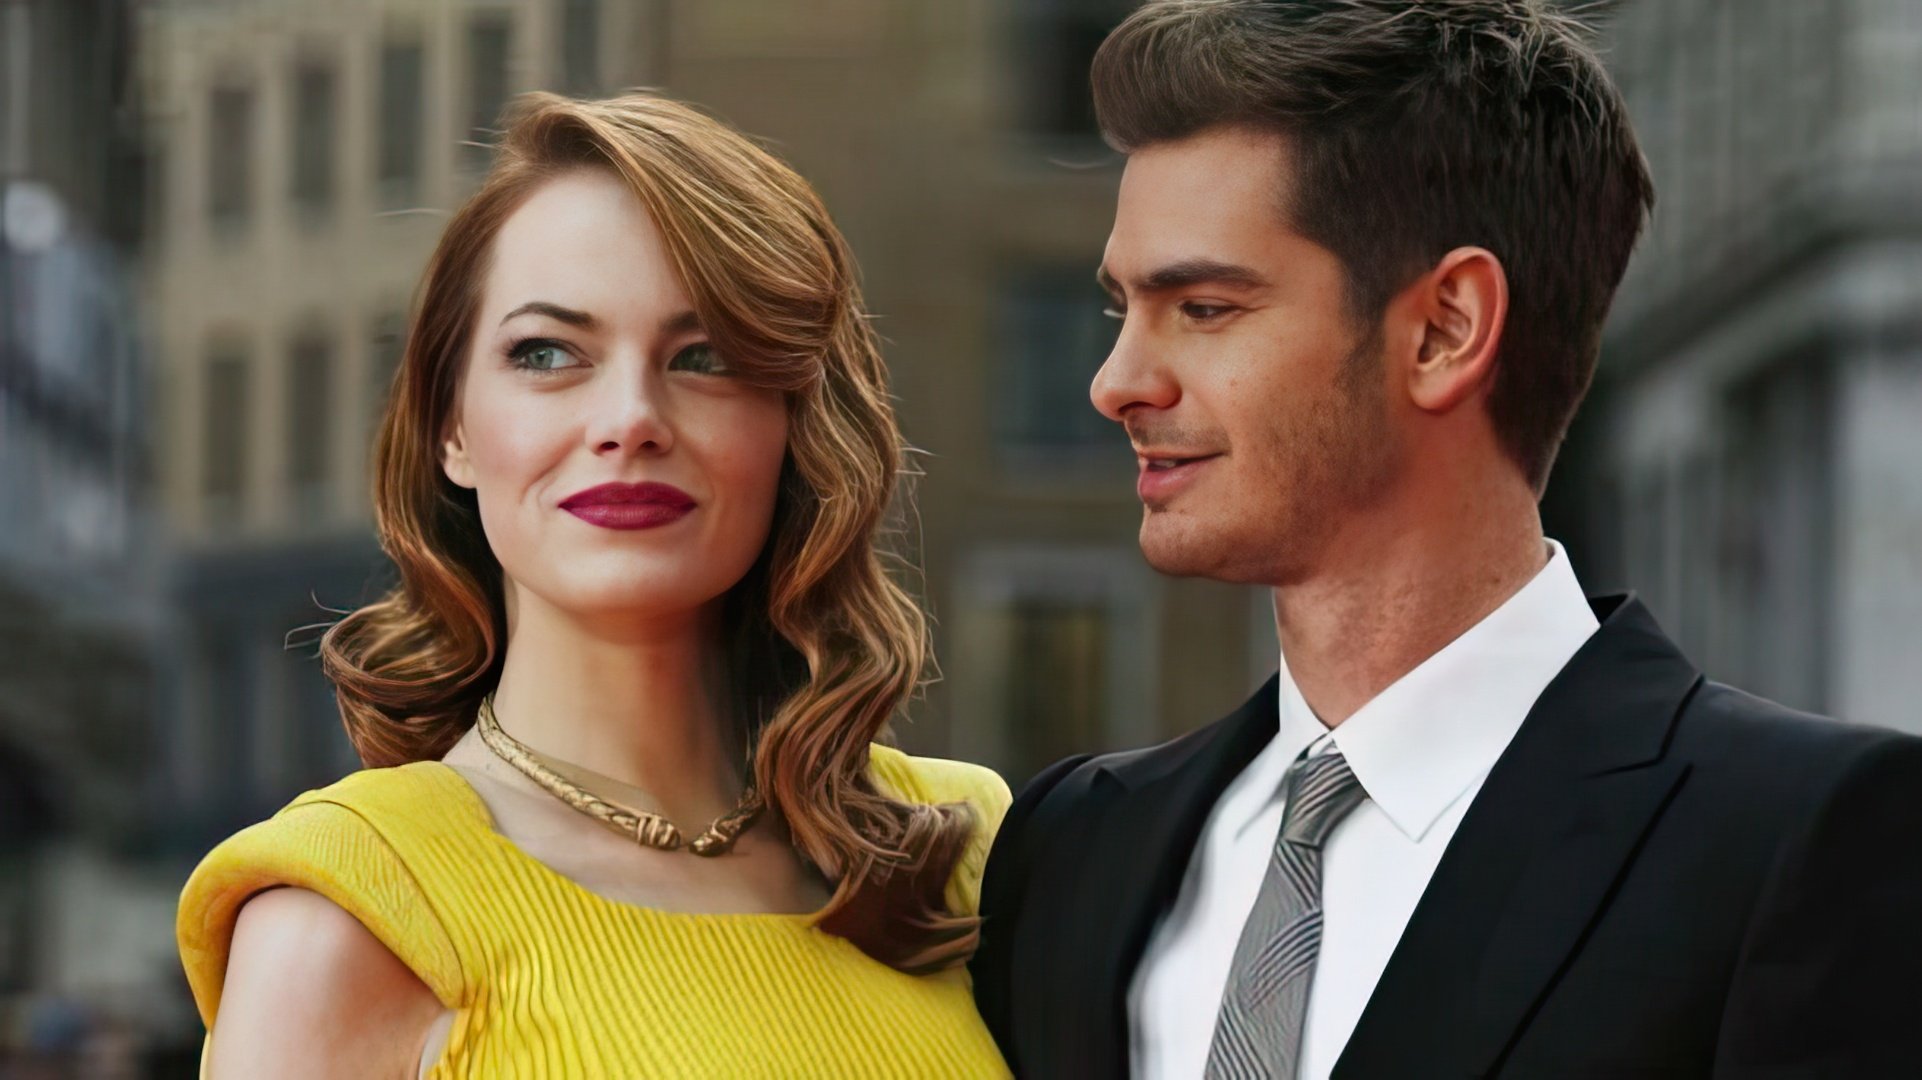 Andrew Garfield and Emma Stone met on the set